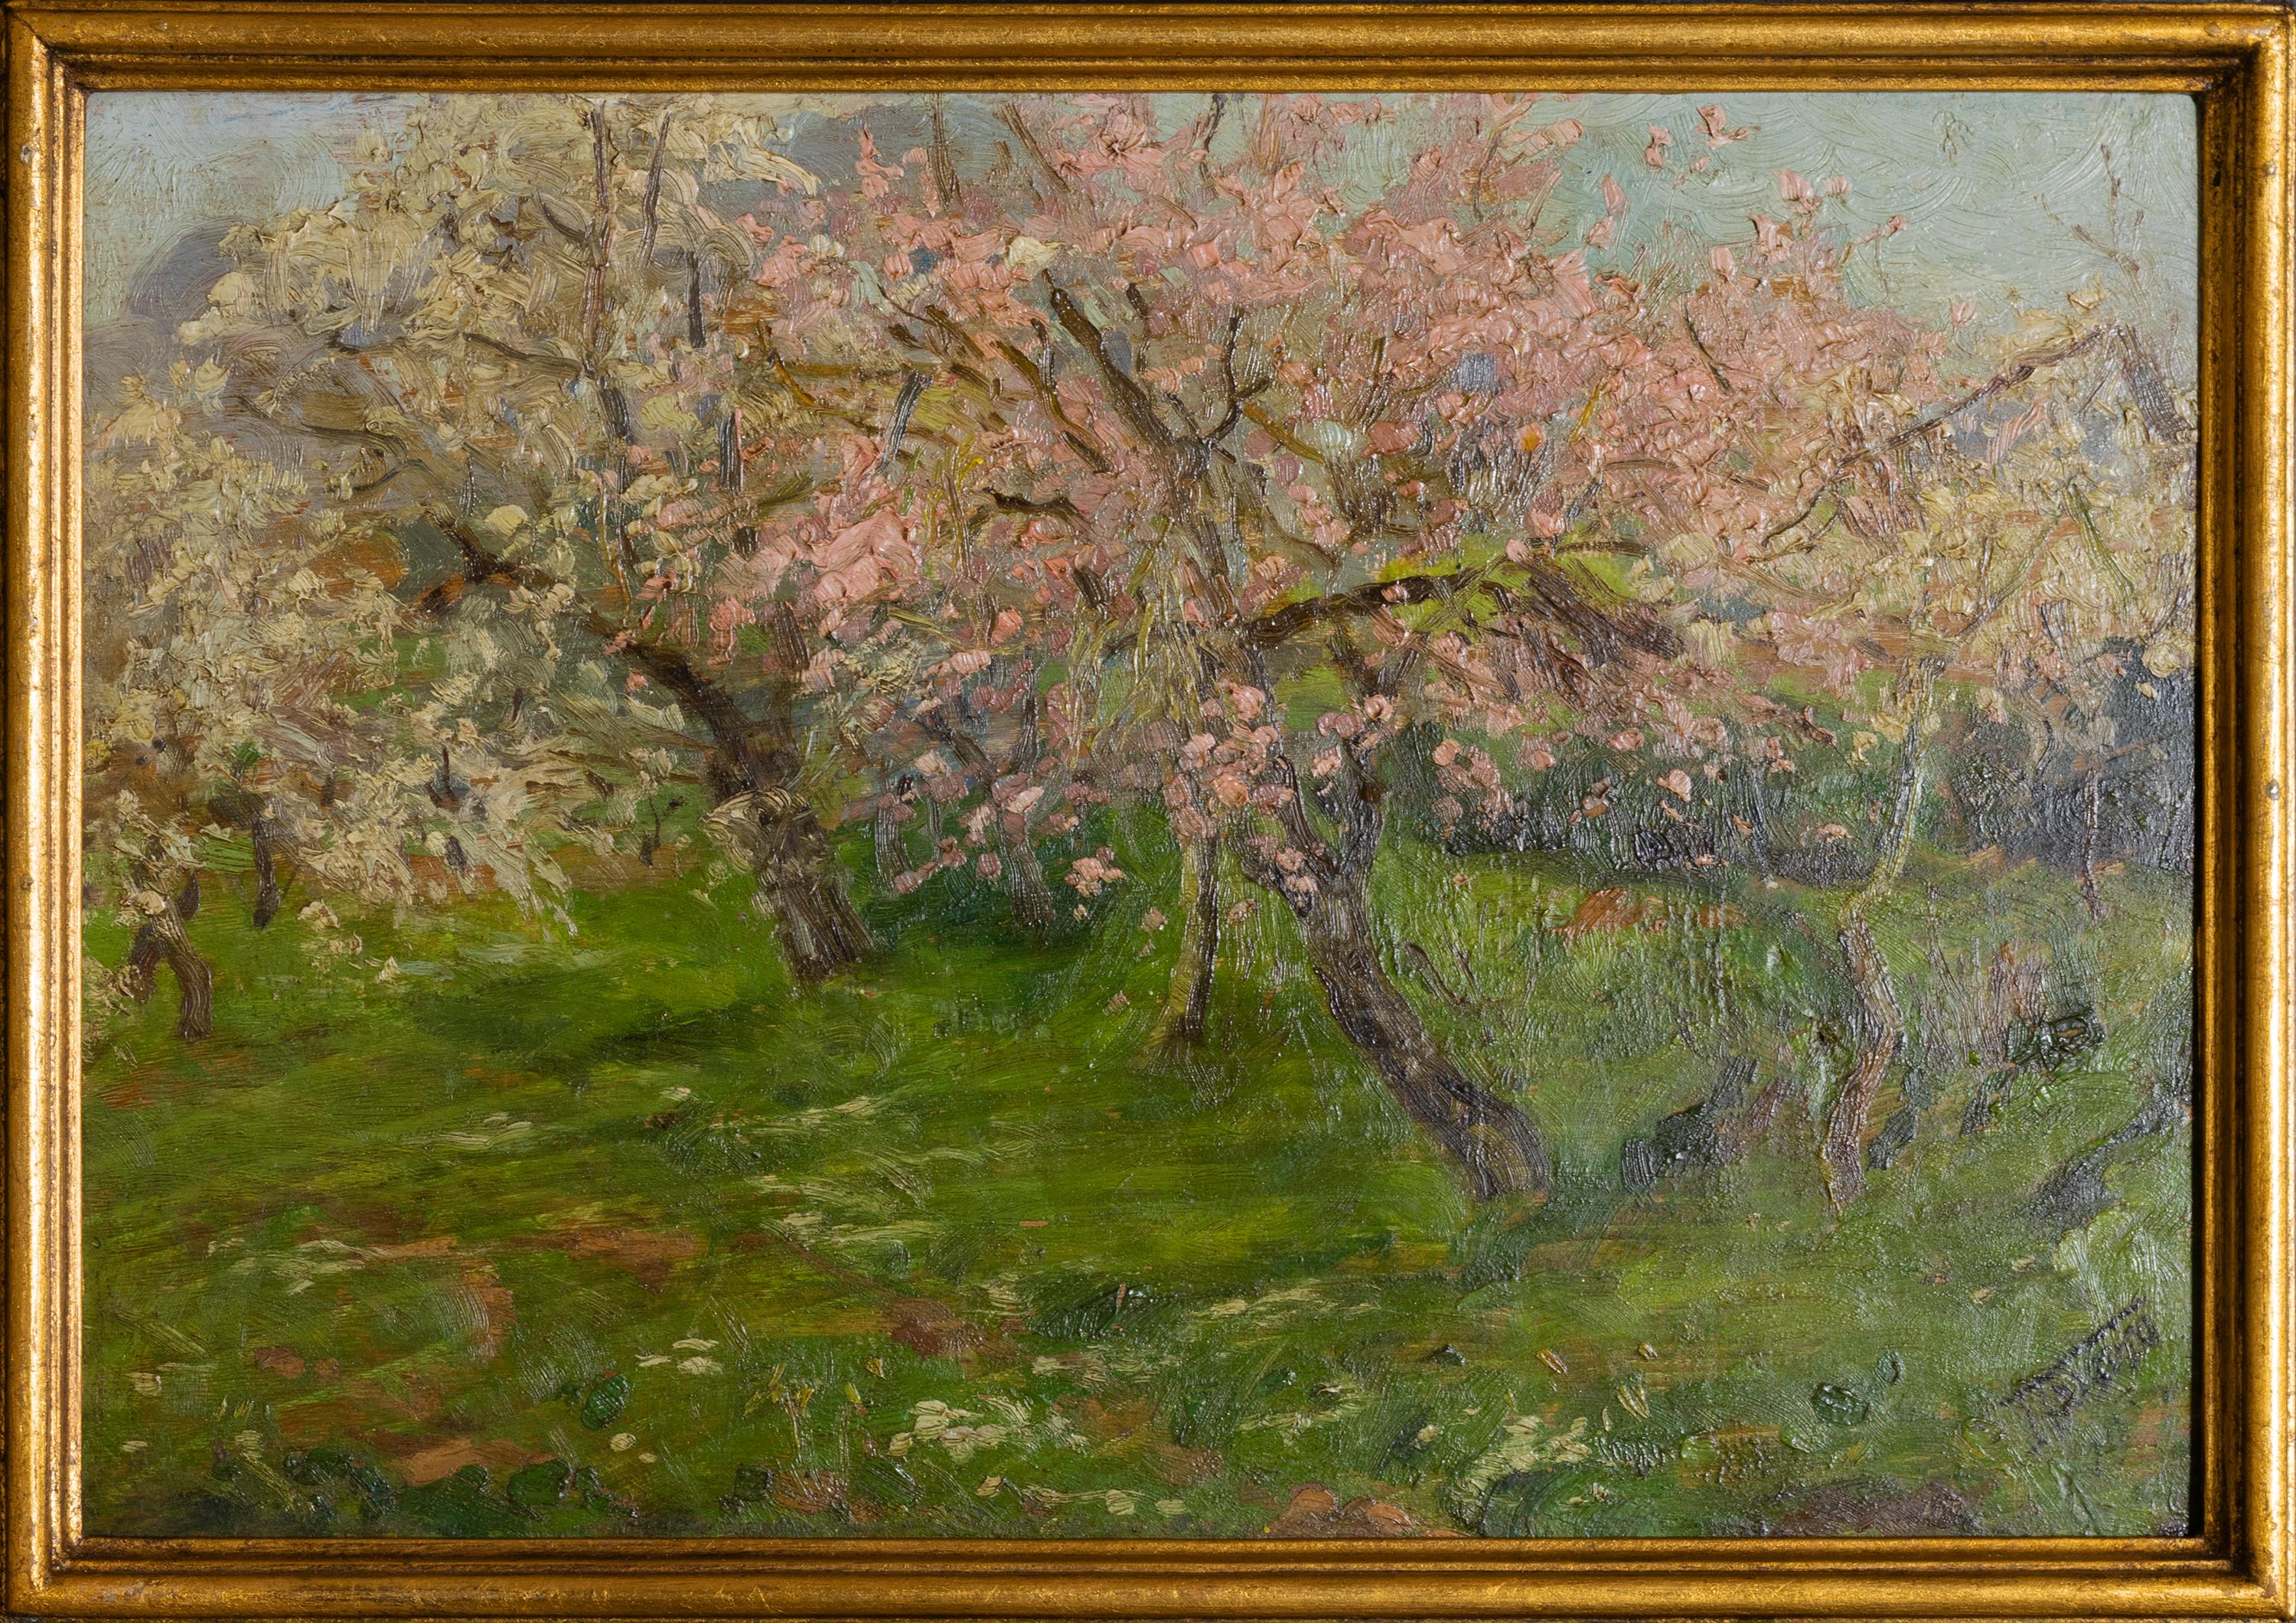 A painting of a nature scene of almond trees in bloom in Spring by the portuguese painter Falcão Trigoso.
Signed «F . Trigoso». 

Oil on platex.

Falcão Trigoso was born in 1879 and died in 1956, a supporter of the Ar-Livrismo. 
Falcão Trigoso was a